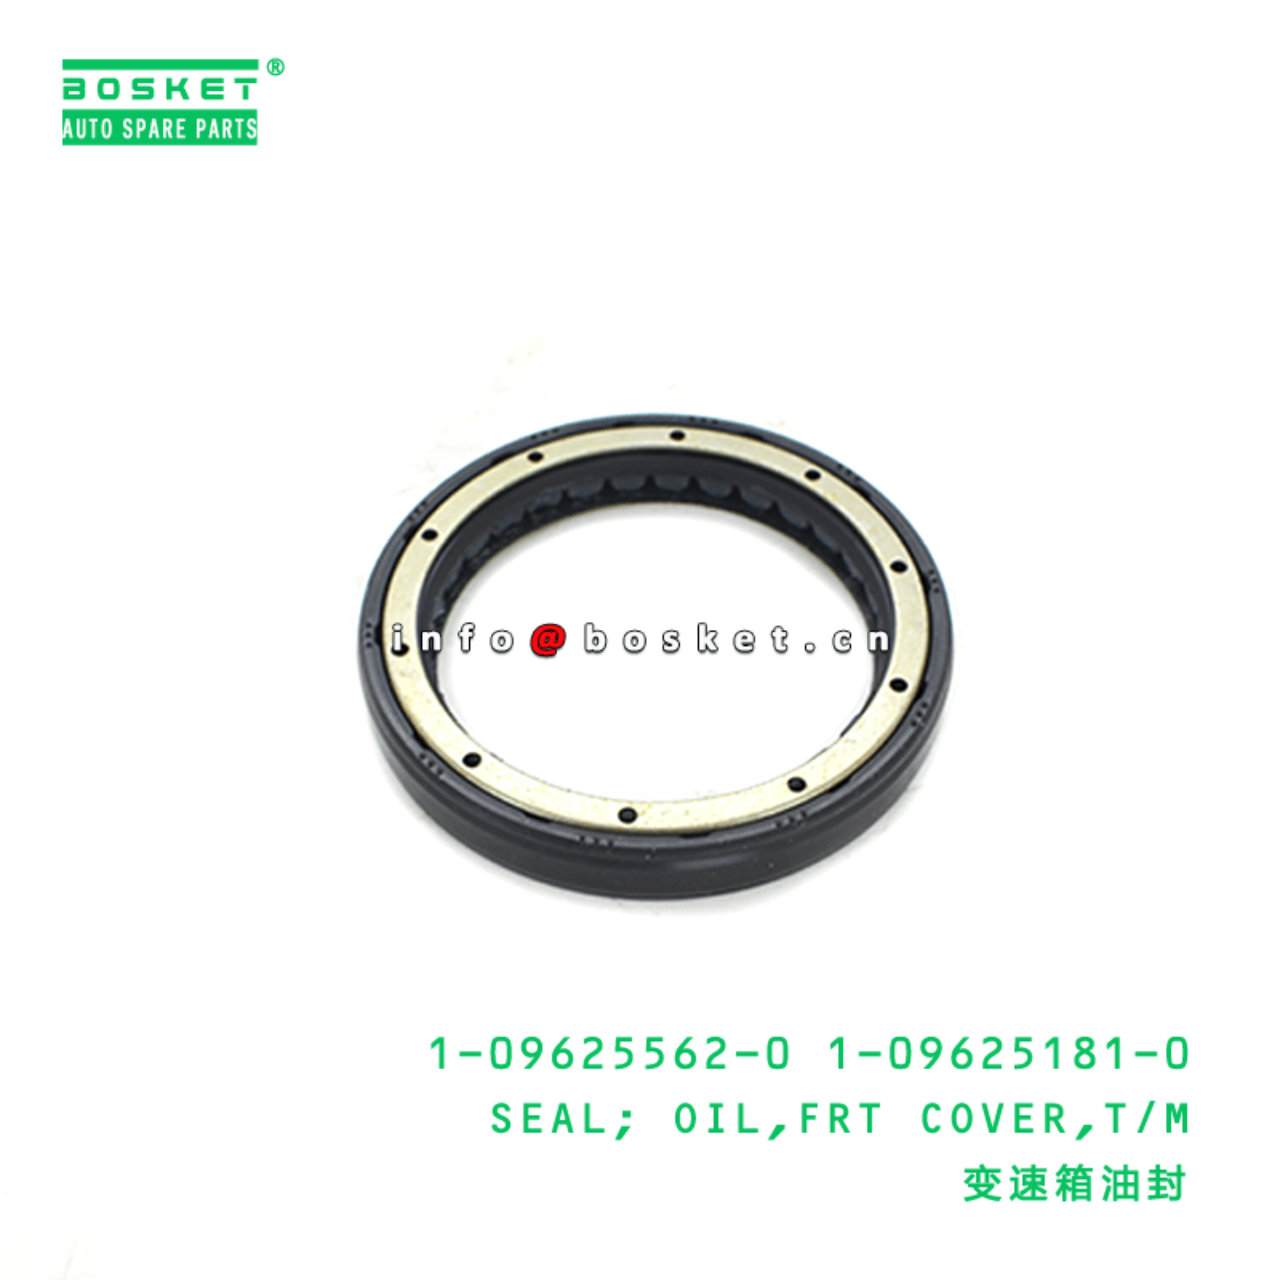 1-09625562-0 1-09625181-0 Transmission Front Cover Oil Seal 1096255620 1096251810 Suitable for ISUZU